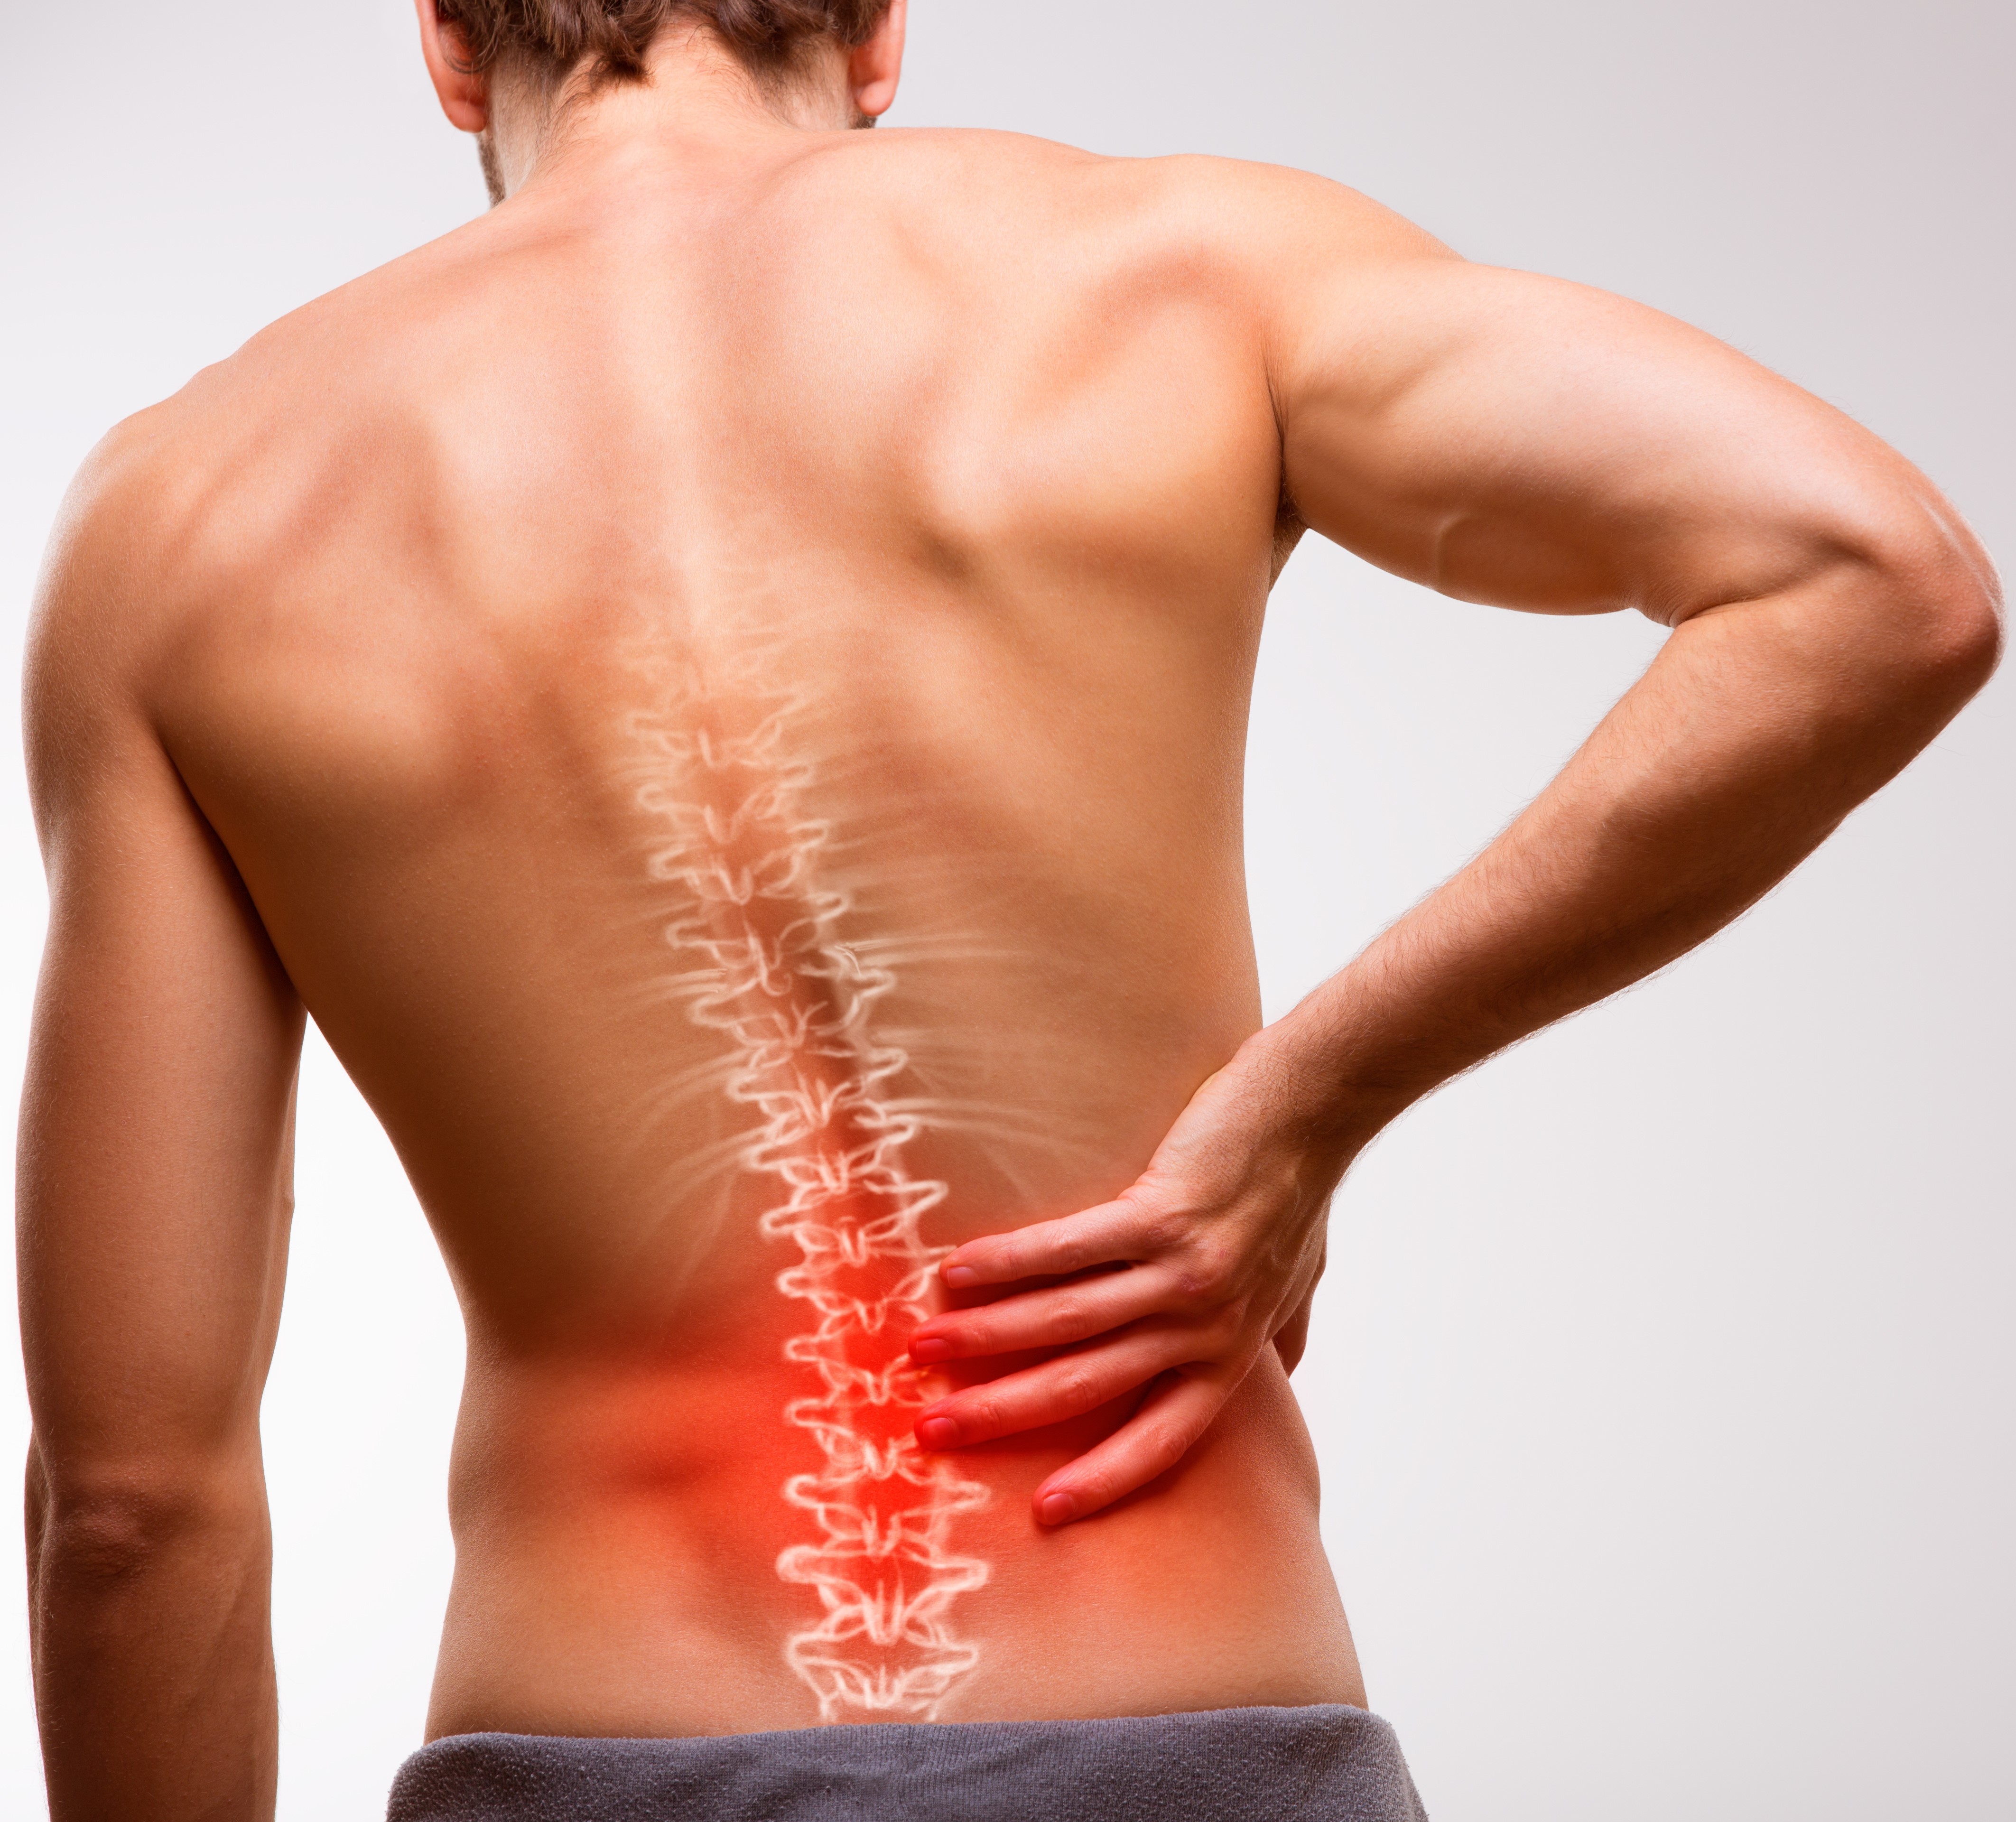 Chronic back pain stem cell therapy